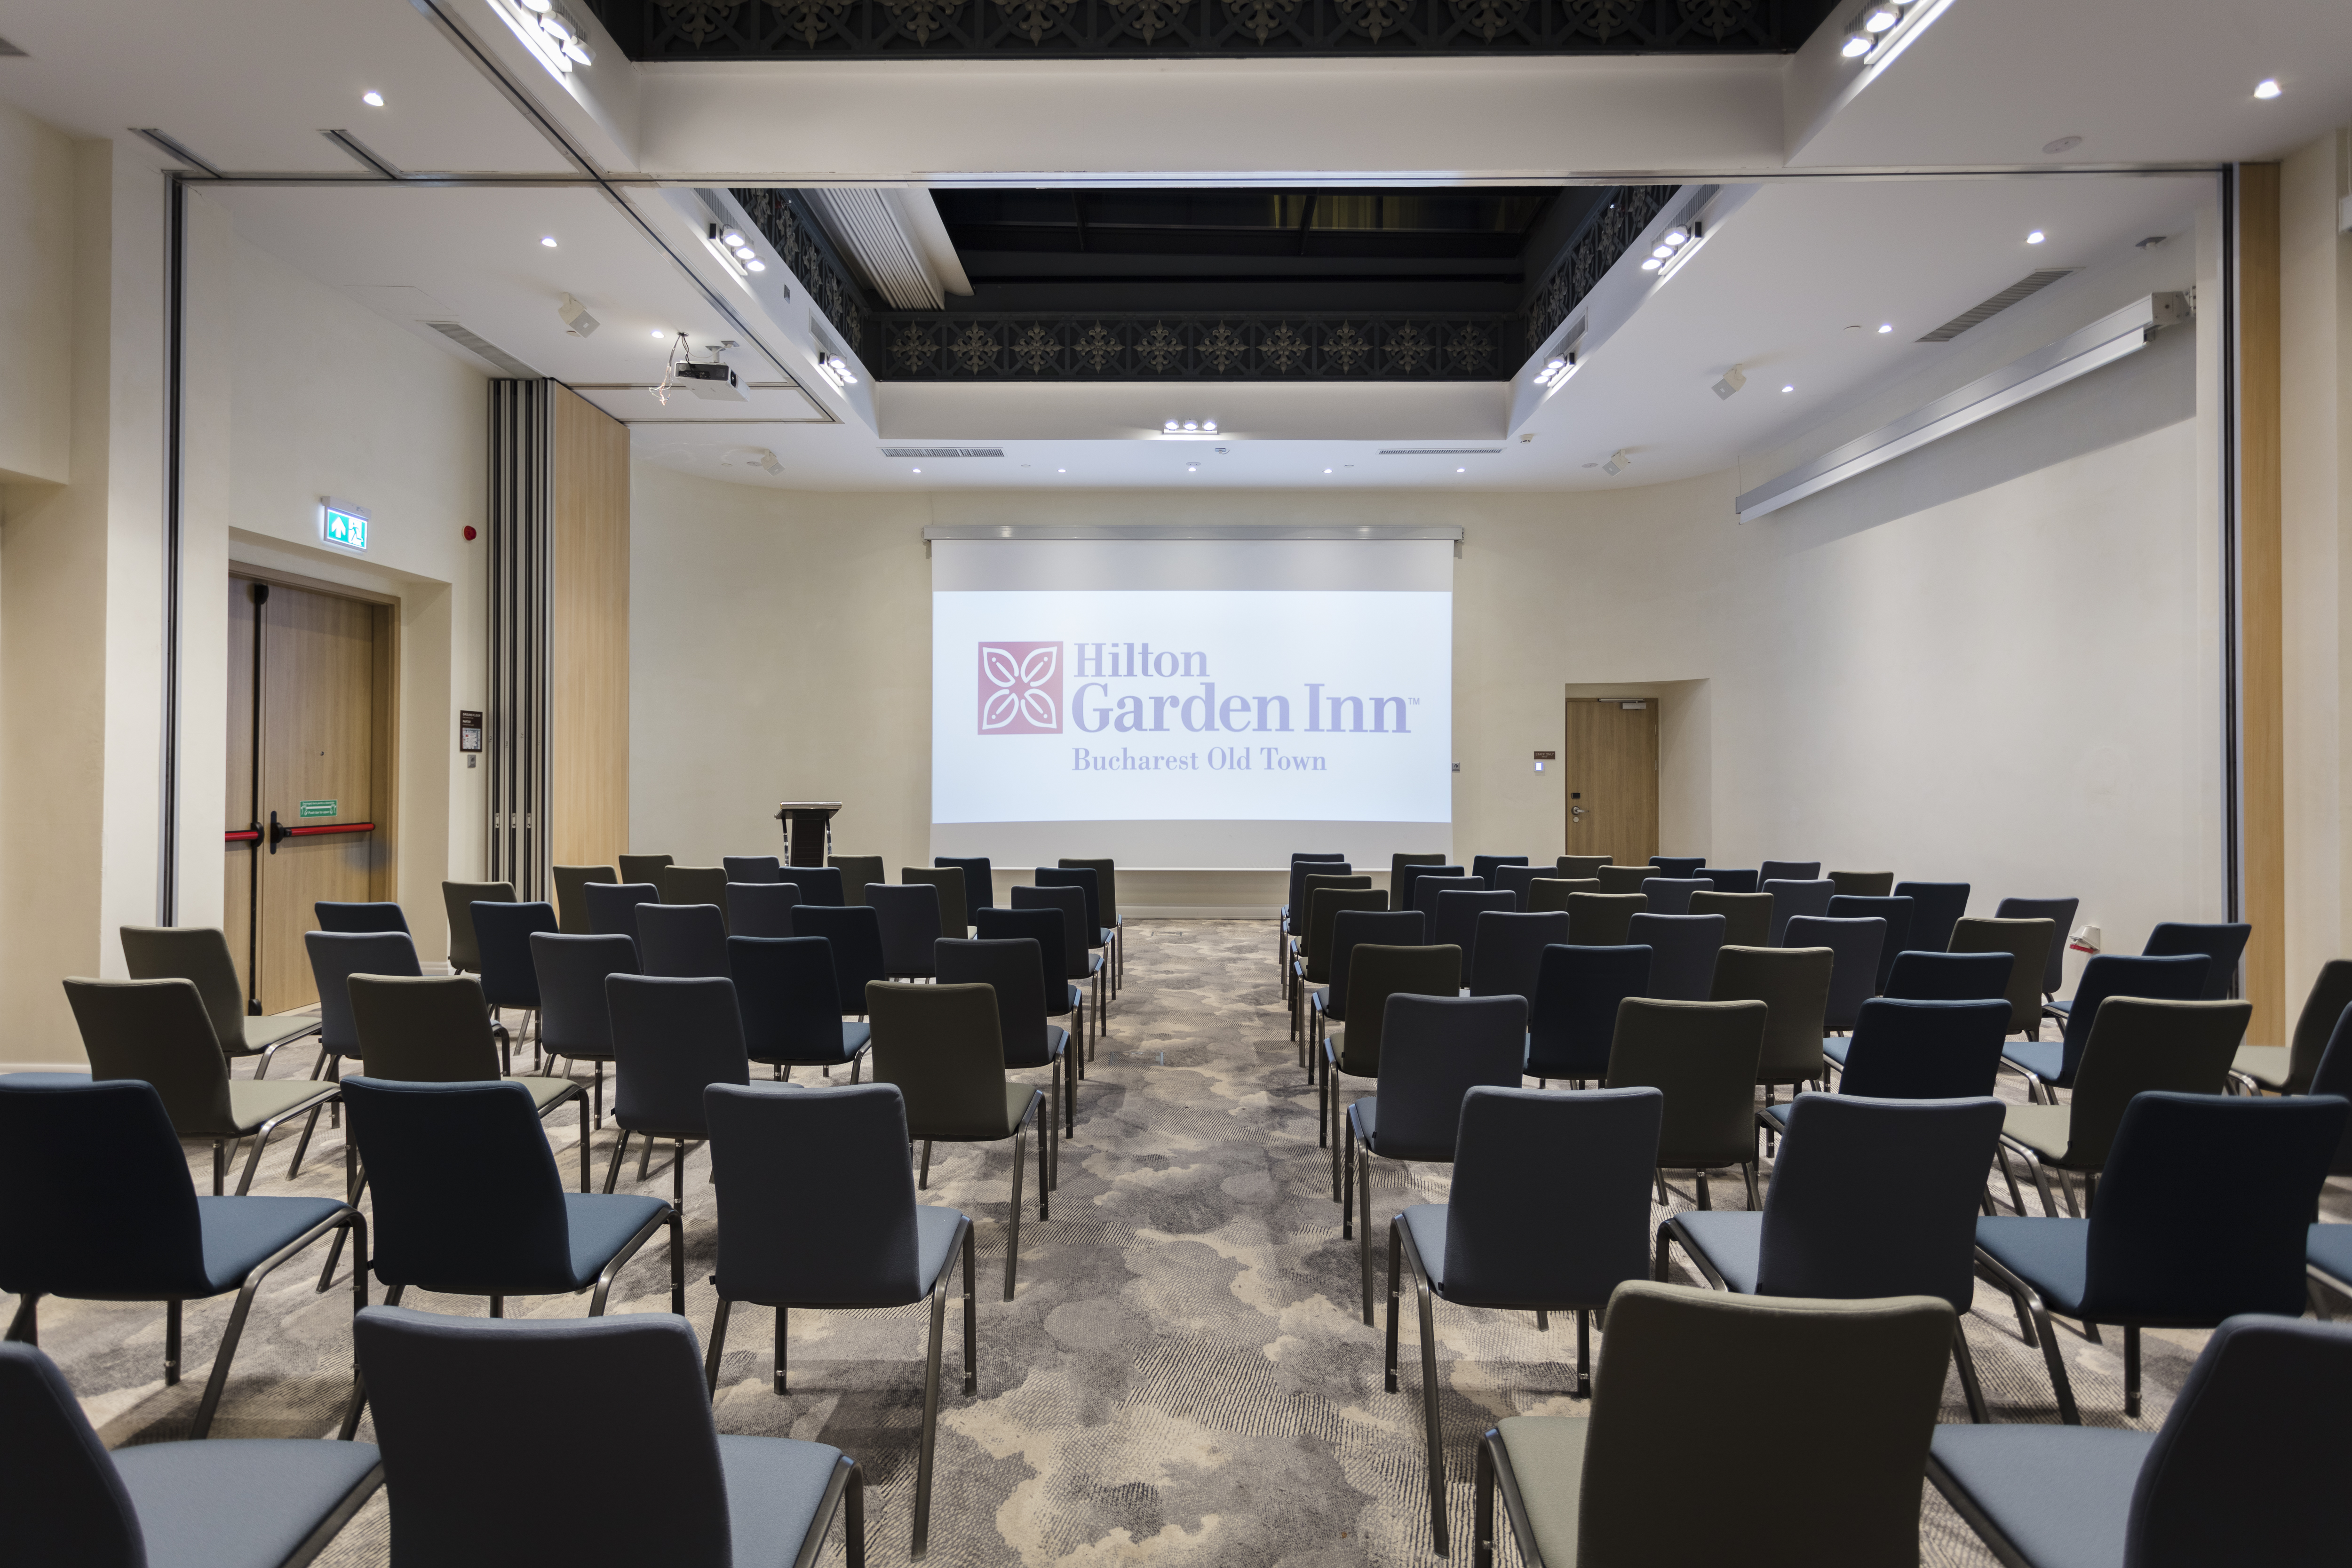 Meeting Room Theater Setup with Projector Screen